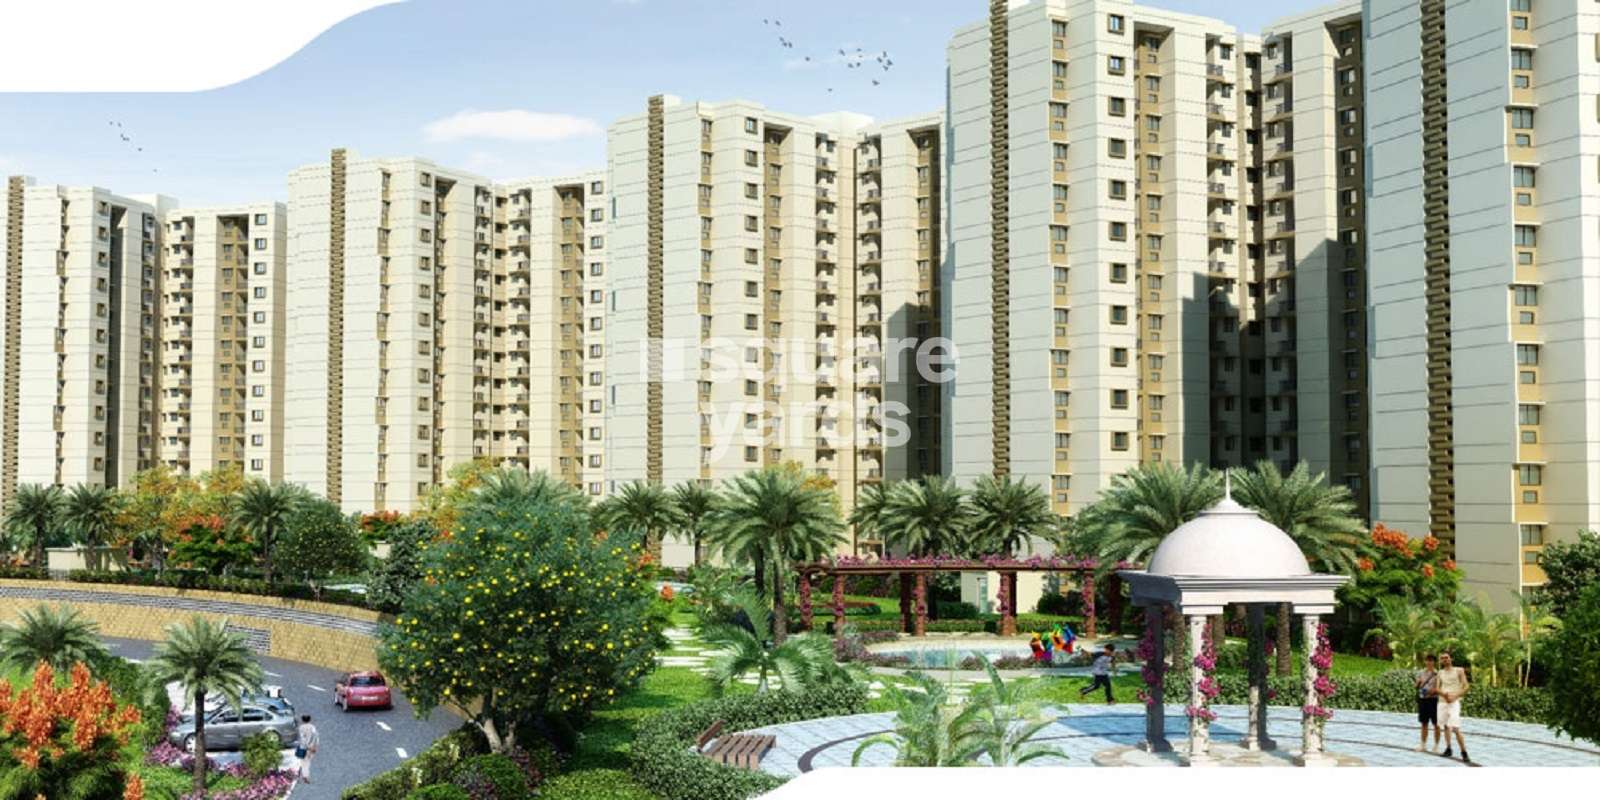 Jaypee Naturvue Apartments Cover Image